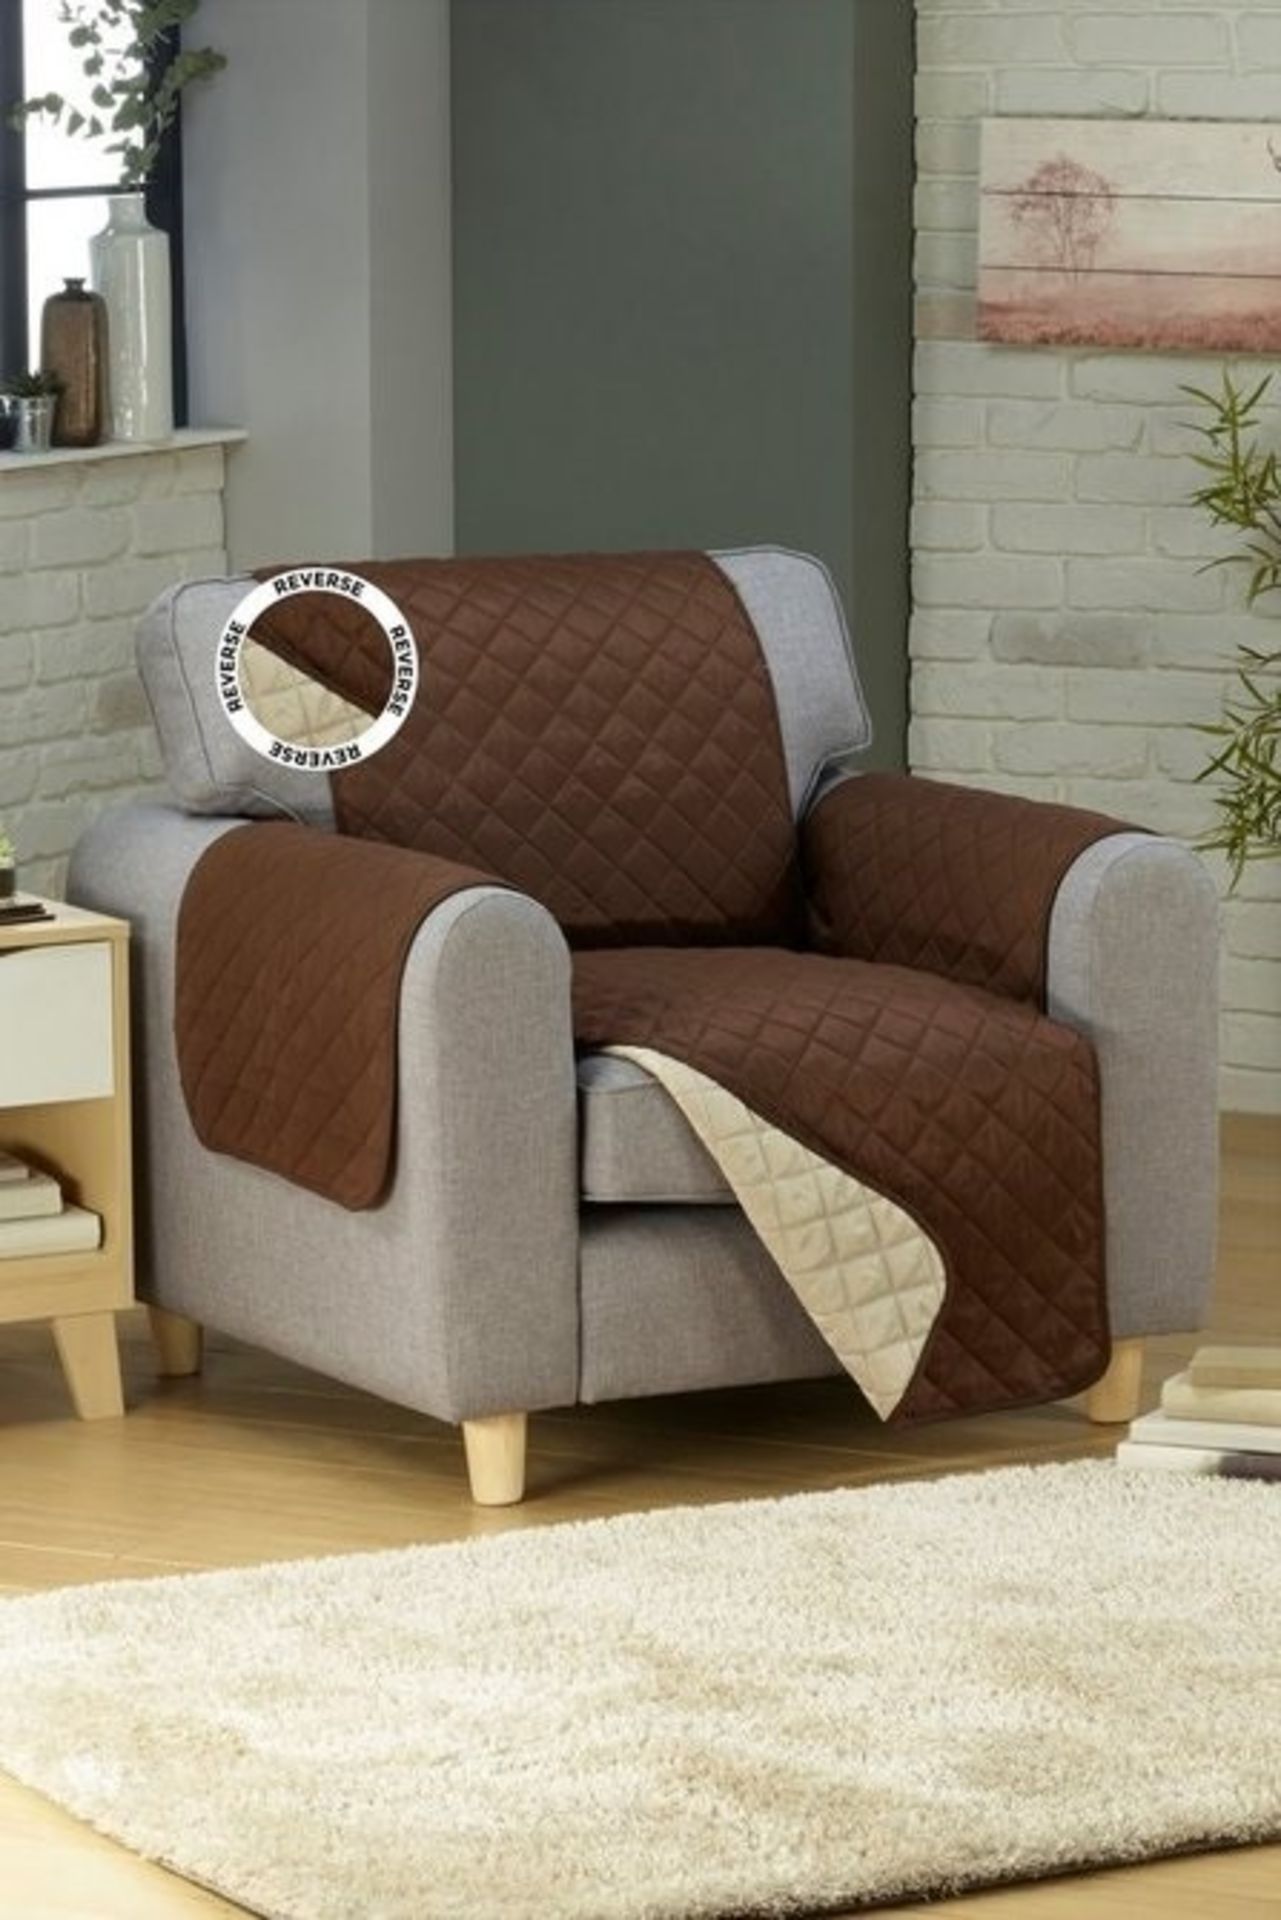 1 BAGGED REVERSIBLE FURNITURE PROTECTOR IN BROWN (PUBLIC VIEWING AVAILABLE)